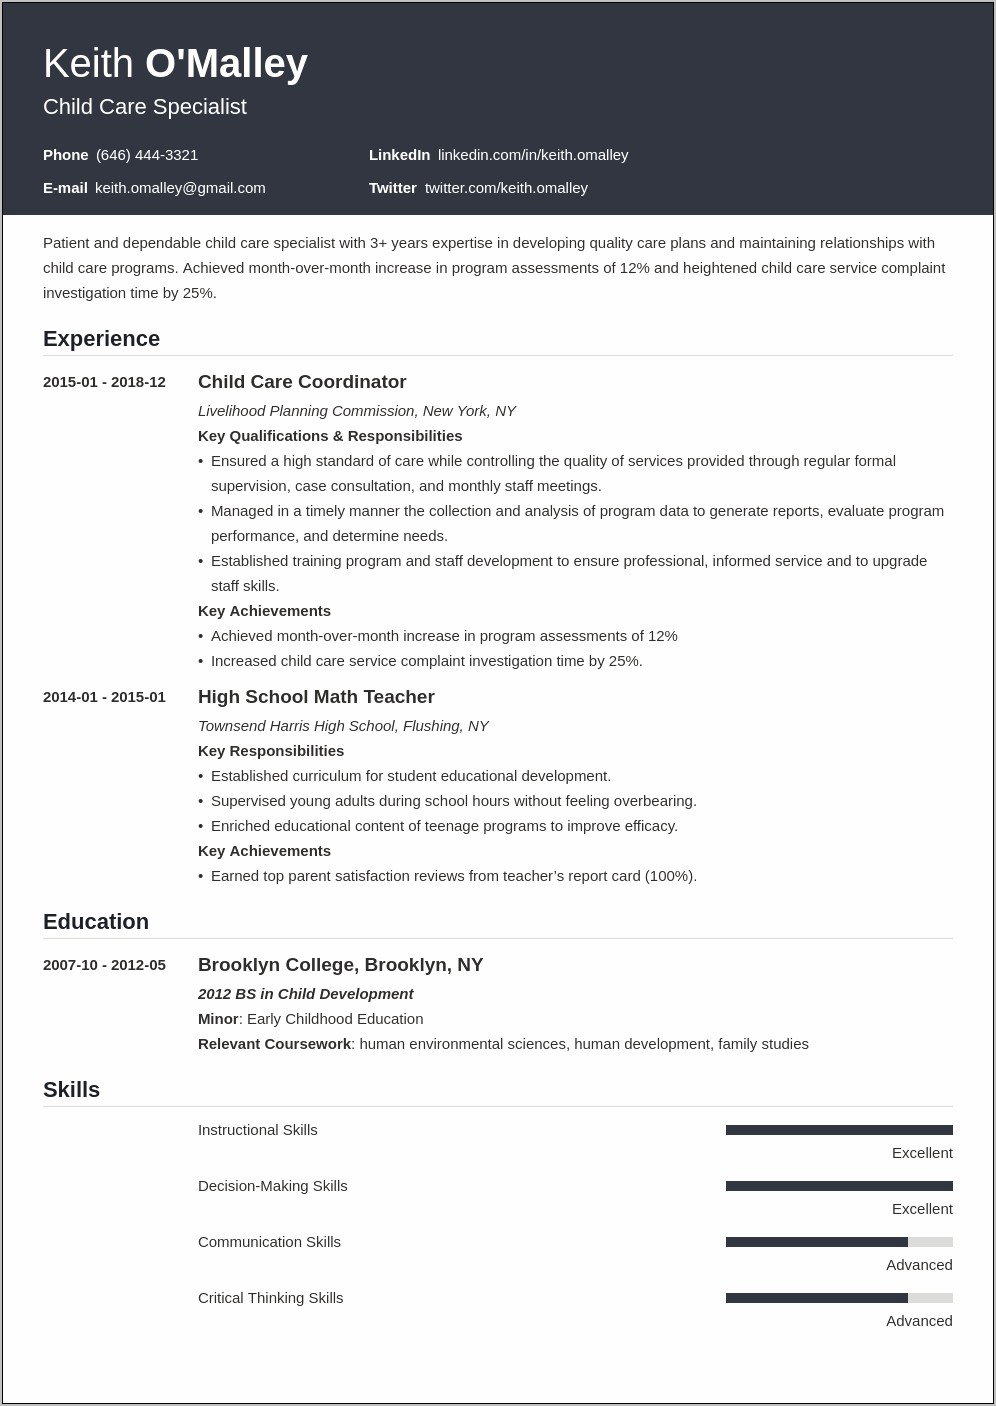 Resume Points For Children Services Worker